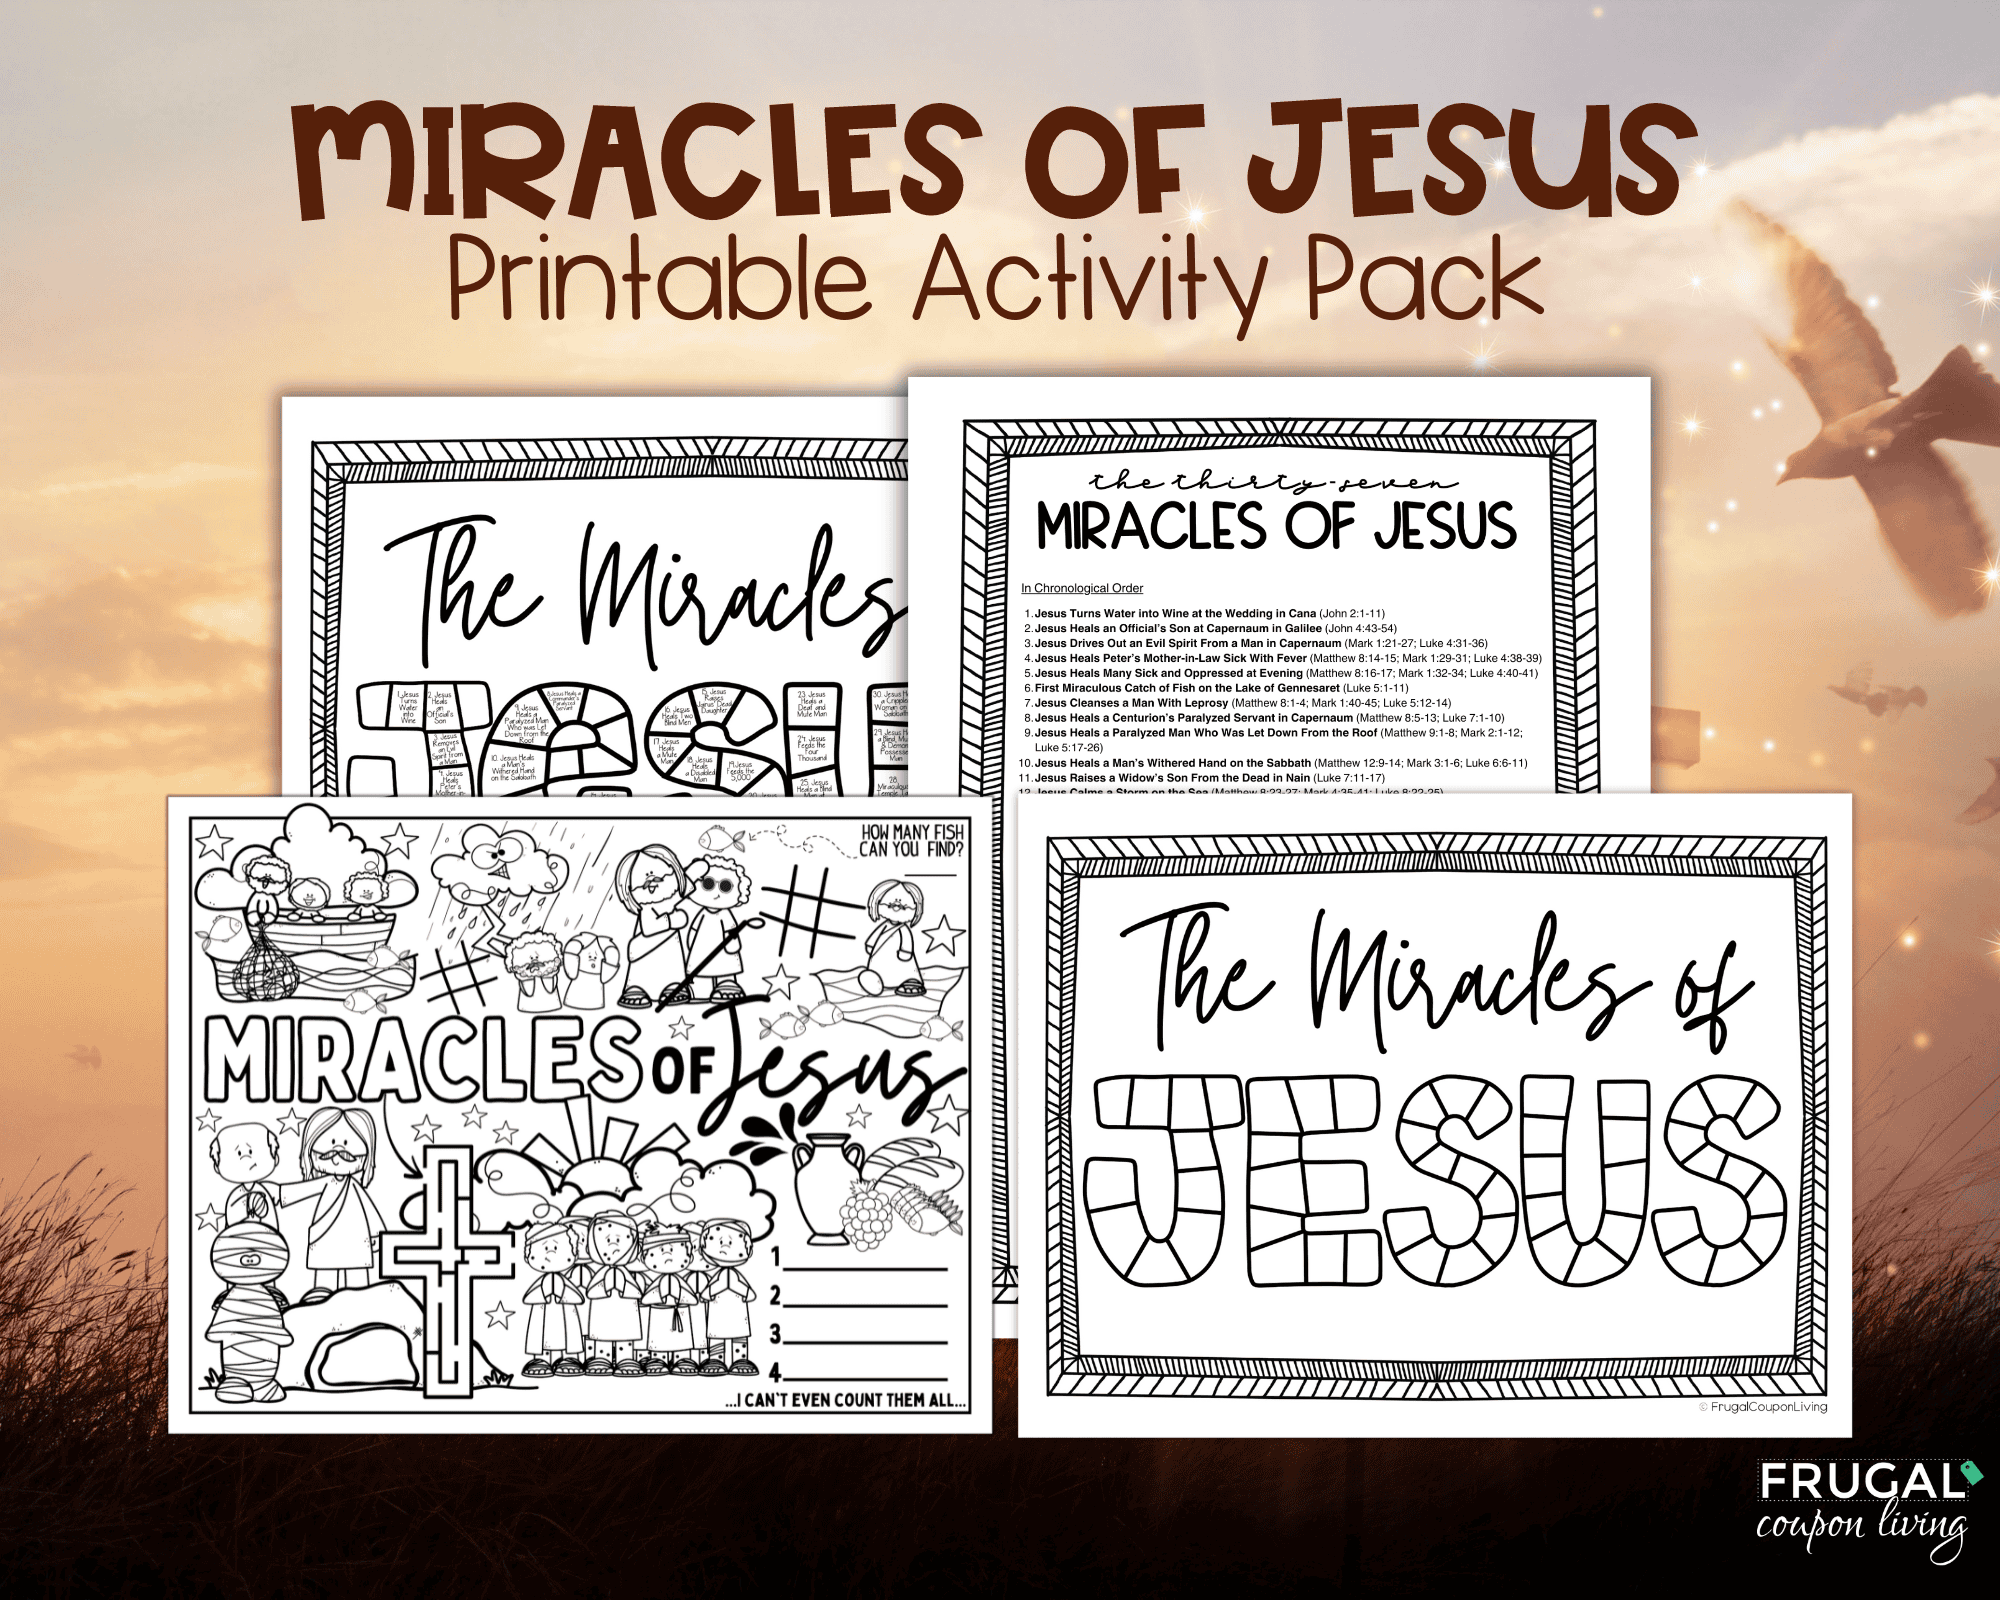 List of the Miracles of Jesus Christ